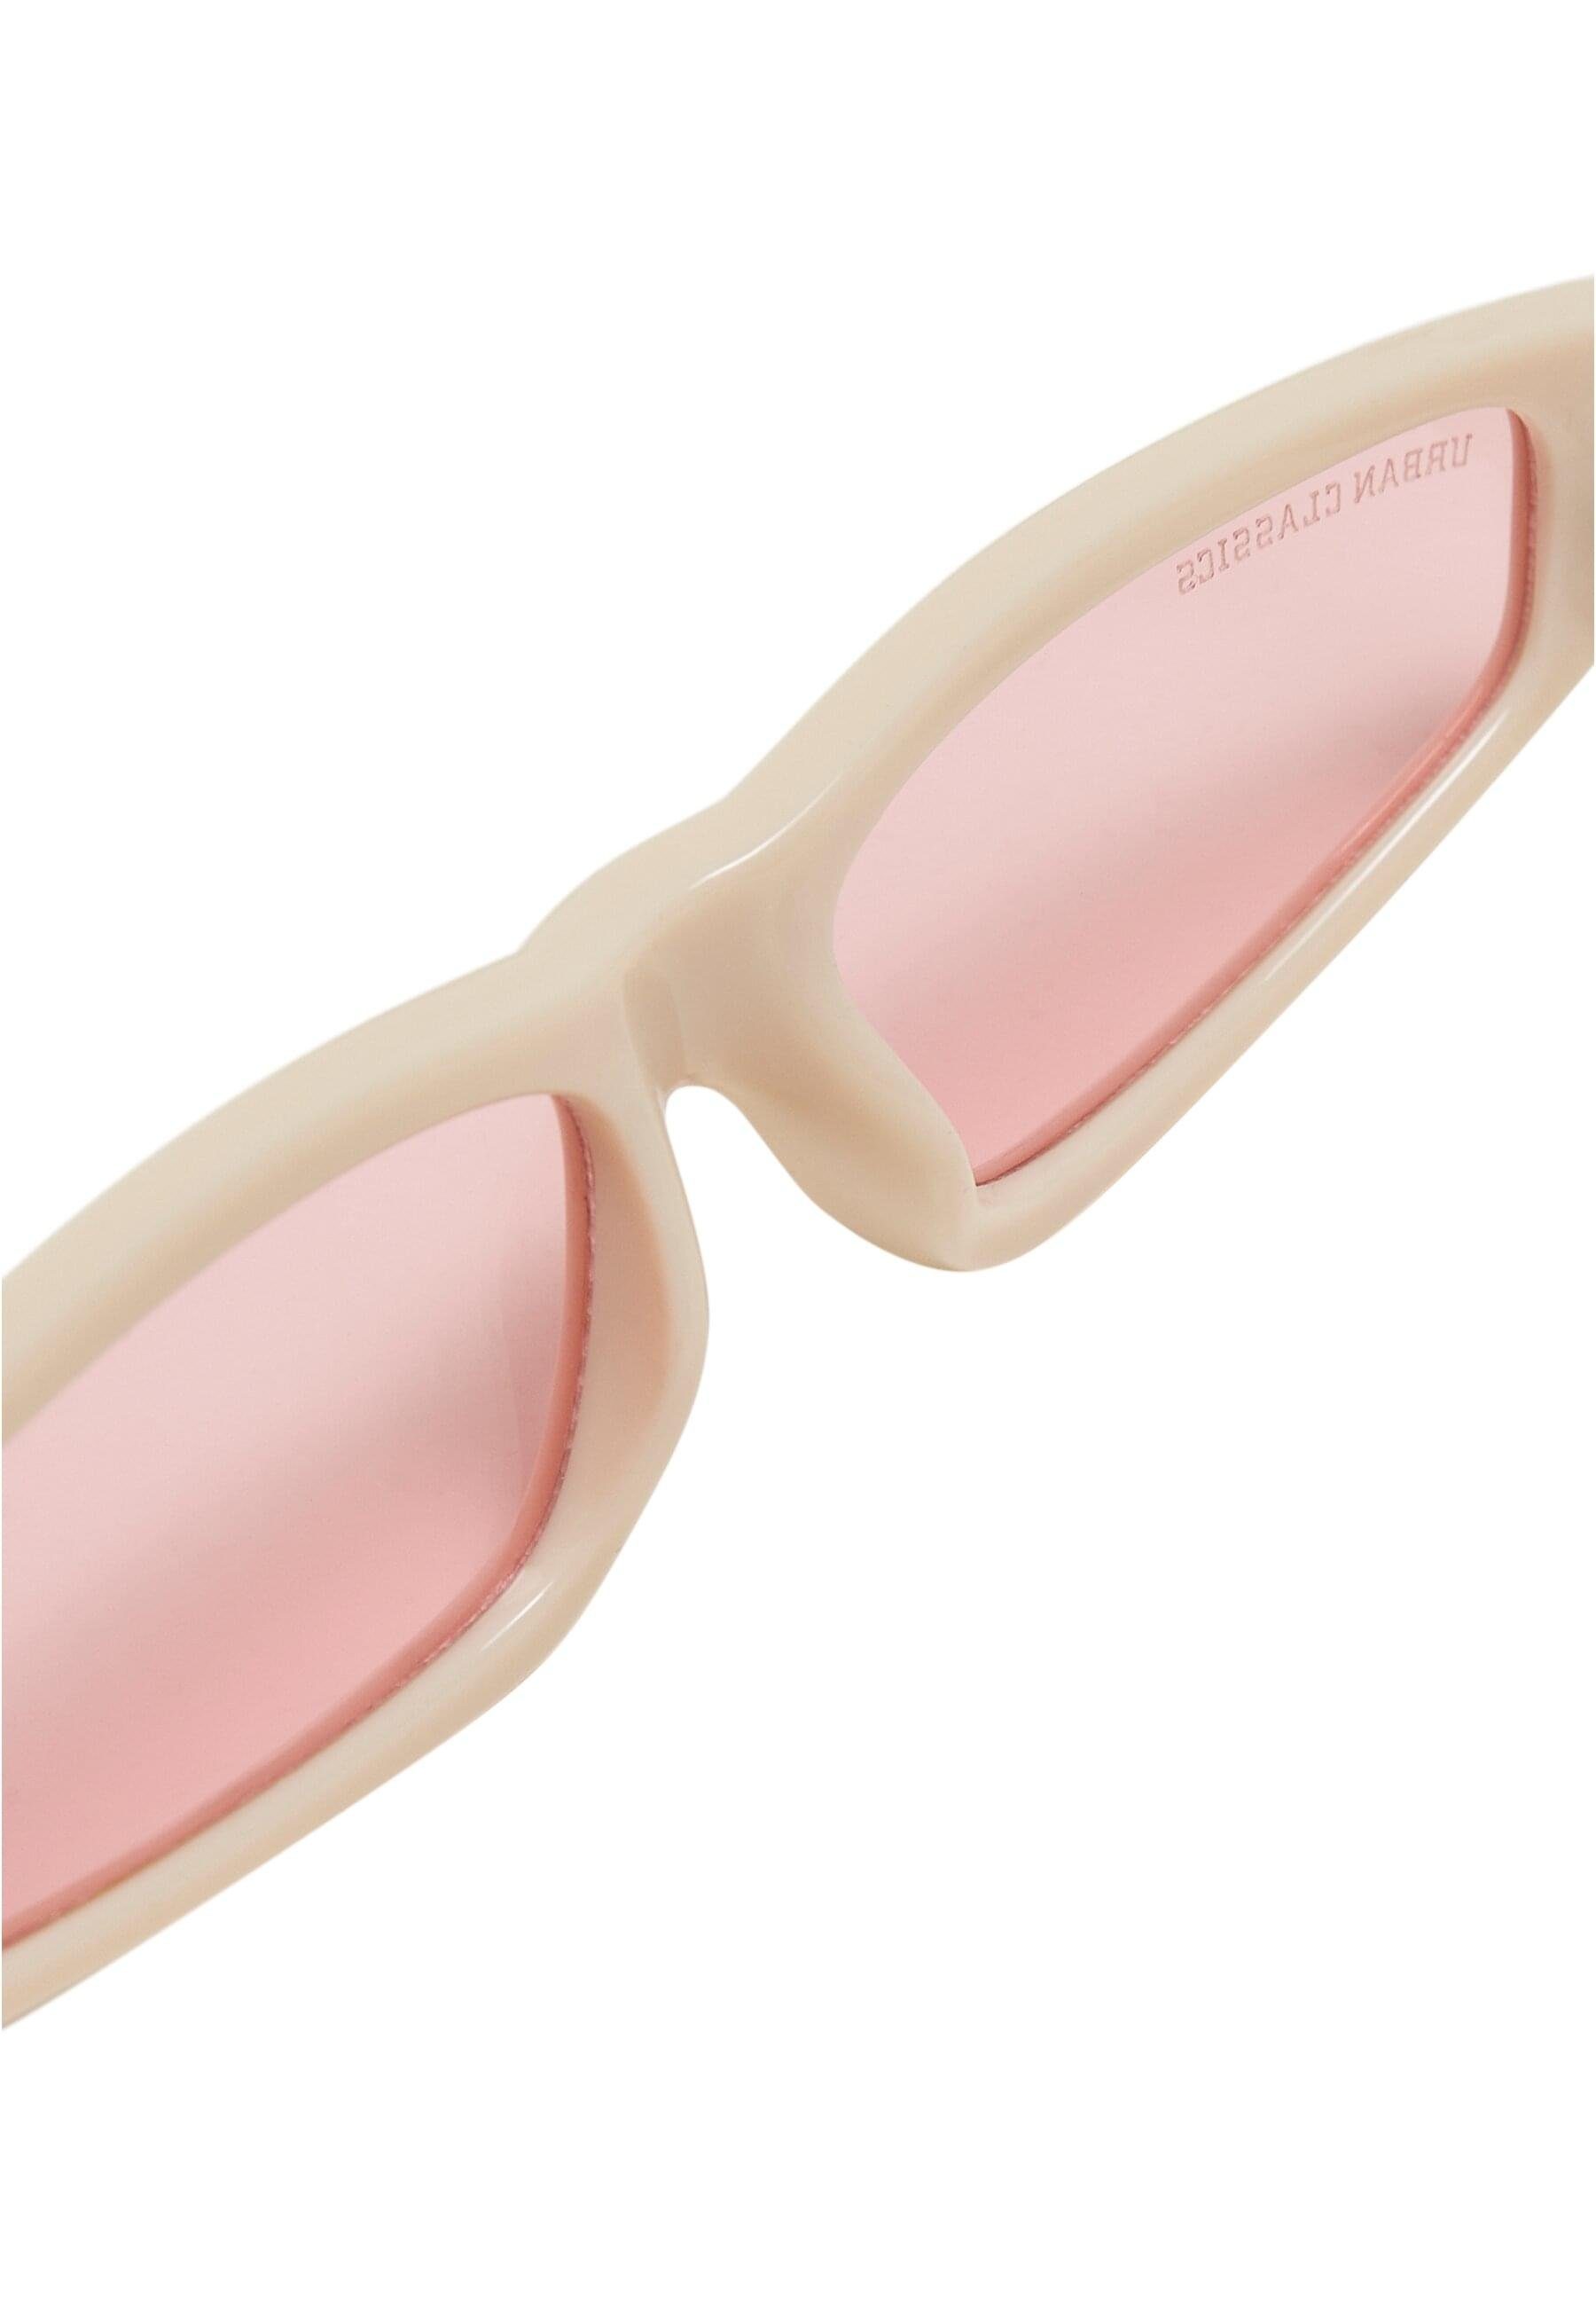 2-Pack URBAN brown/brown+offwhite/pink Lefkada CLASSICS Unisex Sunglasses Sonnenbrille